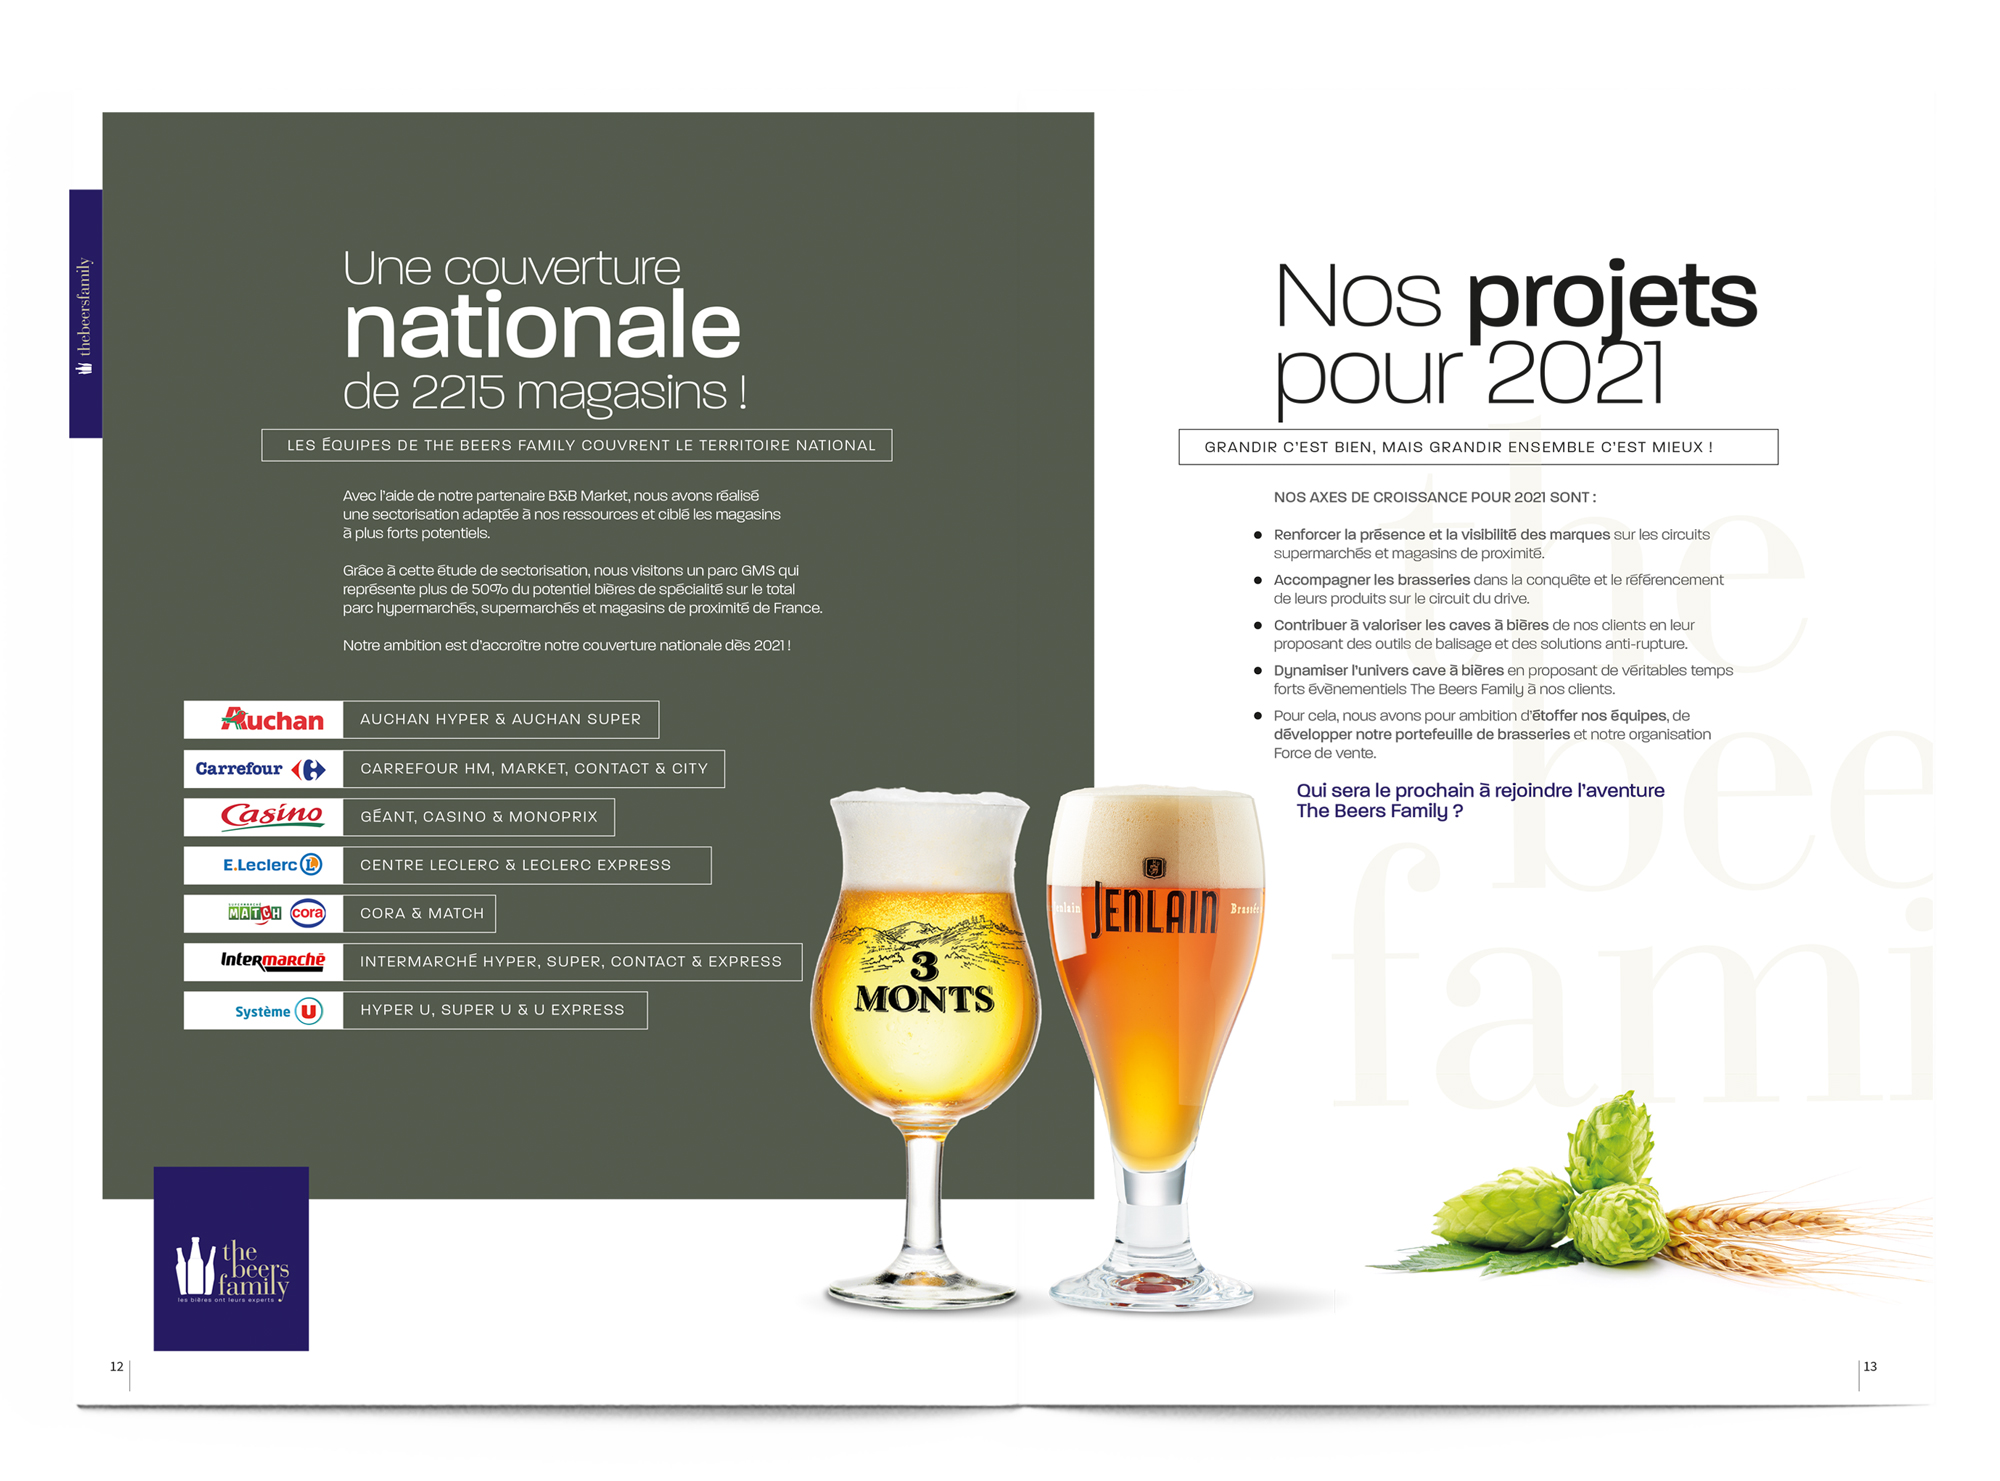 The Beers Family page brochure Little Big Idea Agence de Communication Lilloise